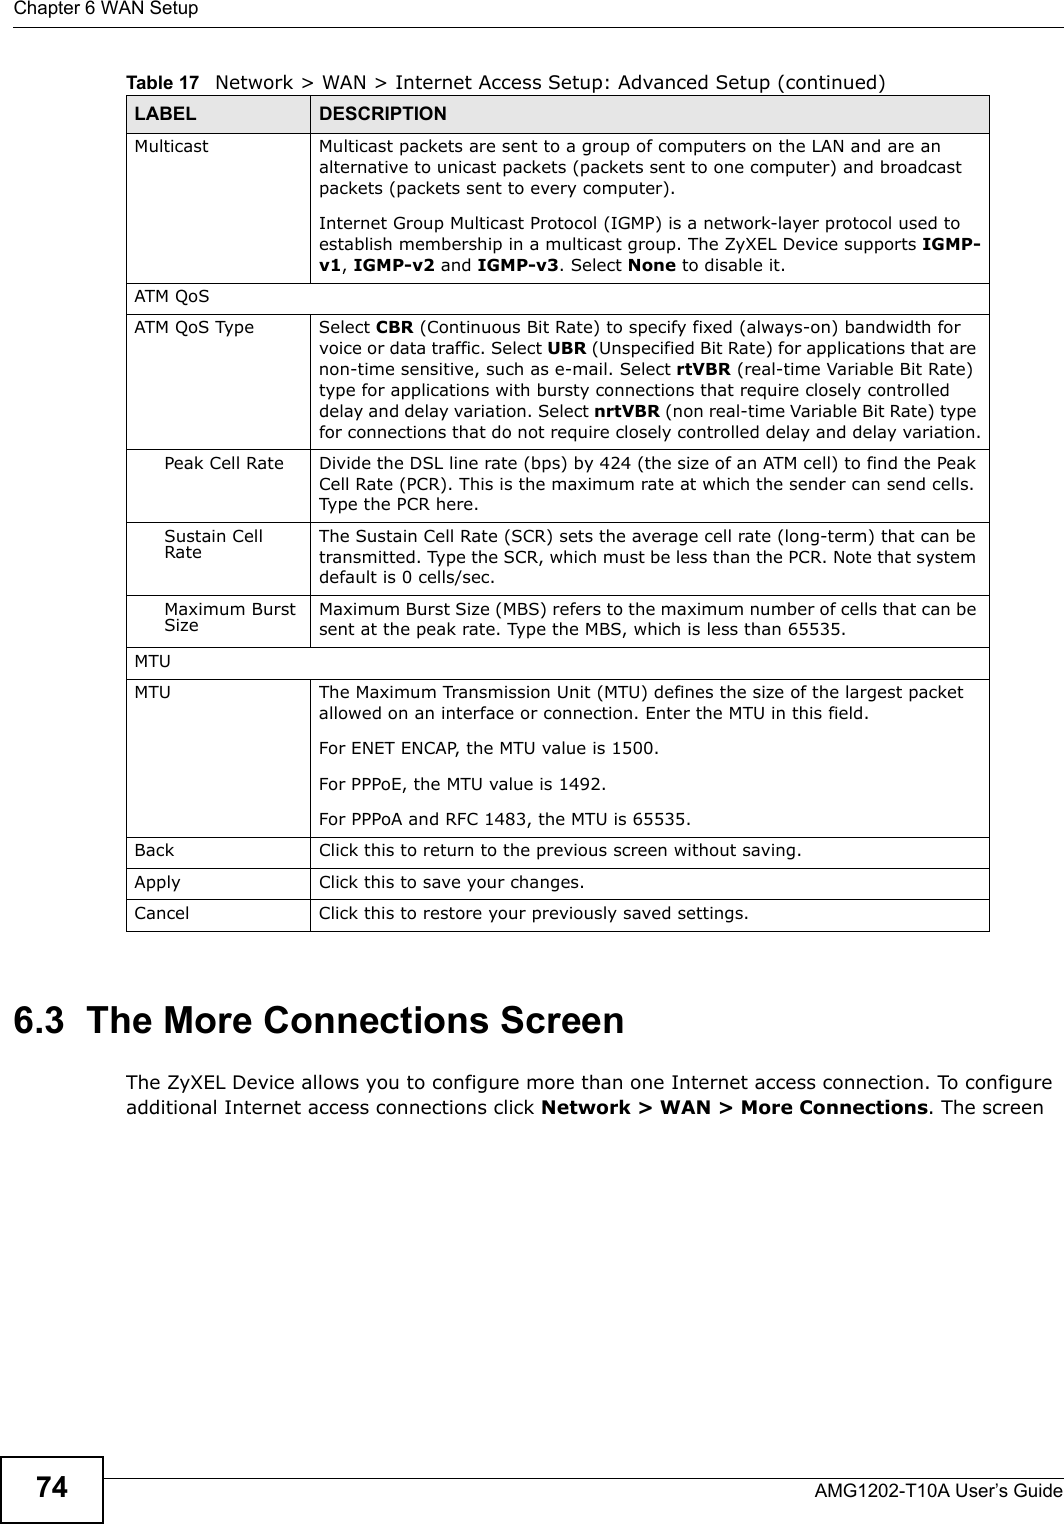 Chapter 6 WAN SetupAMG1202-T10A User’s Guide746.3  The More Connections ScreenThe ZyXEL Device allows you to configure more than one Internet access connection. To configure additional Internet access connections click Network &gt; WAN &gt; More Connections. The screen Multicast Multicast packets are sent to a group of computers on the LAN and are an alternative to unicast packets (packets sent to one computer) and broadcast packets (packets sent to every computer).Internet Group Multicast Protocol (IGMP) is a network-layer protocol used to establish membership in a multicast group. The ZyXEL Device supports IGMP-v1, IGMP-v2 and IGMP-v3. Select None to disable it.ATM QoSATM QoS Type Select CBR (Continuous Bit Rate) to specify fixed (always-on) bandwidth for voice or data traffic. Select UBR (Unspecified Bit Rate) for applications that are non-time sensitive, such as e-mail. Select rtVBR (real-time Variable Bit Rate) type for applications with bursty connections that require closely controlled delay and delay variation. Select nrtVBR (non real-time Variable Bit Rate) type for connections that do not require closely controlled delay and delay variation.Peak Cell Rate Divide the DSL line rate (bps) by 424 (the size of an ATM cell) to find the Peak Cell Rate (PCR). This is the maximum rate at which the sender can send cells. Type the PCR here.Sustain Cell Rate The Sustain Cell Rate (SCR) sets the average cell rate (long-term) that can be transmitted. Type the SCR, which must be less than the PCR. Note that system default is 0 cells/sec. Maximum Burst Size Maximum Burst Size (MBS) refers to the maximum number of cells that can be sent at the peak rate. Type the MBS, which is less than 65535. MTUMTU The Maximum Transmission Unit (MTU) defines the size of the largest packet allowed on an interface or connection. Enter the MTU in this field.For ENET ENCAP, the MTU value is 1500.For PPPoE, the MTU value is 1492.For PPPoA and RFC 1483, the MTU is 65535.Back Click this to return to the previous screen without saving.Apply Click this to save your changes. Cancel Click this to restore your previously saved settings.Table 17   Network &gt; WAN &gt; Internet Access Setup: Advanced Setup (continued)LABEL DESCRIPTION